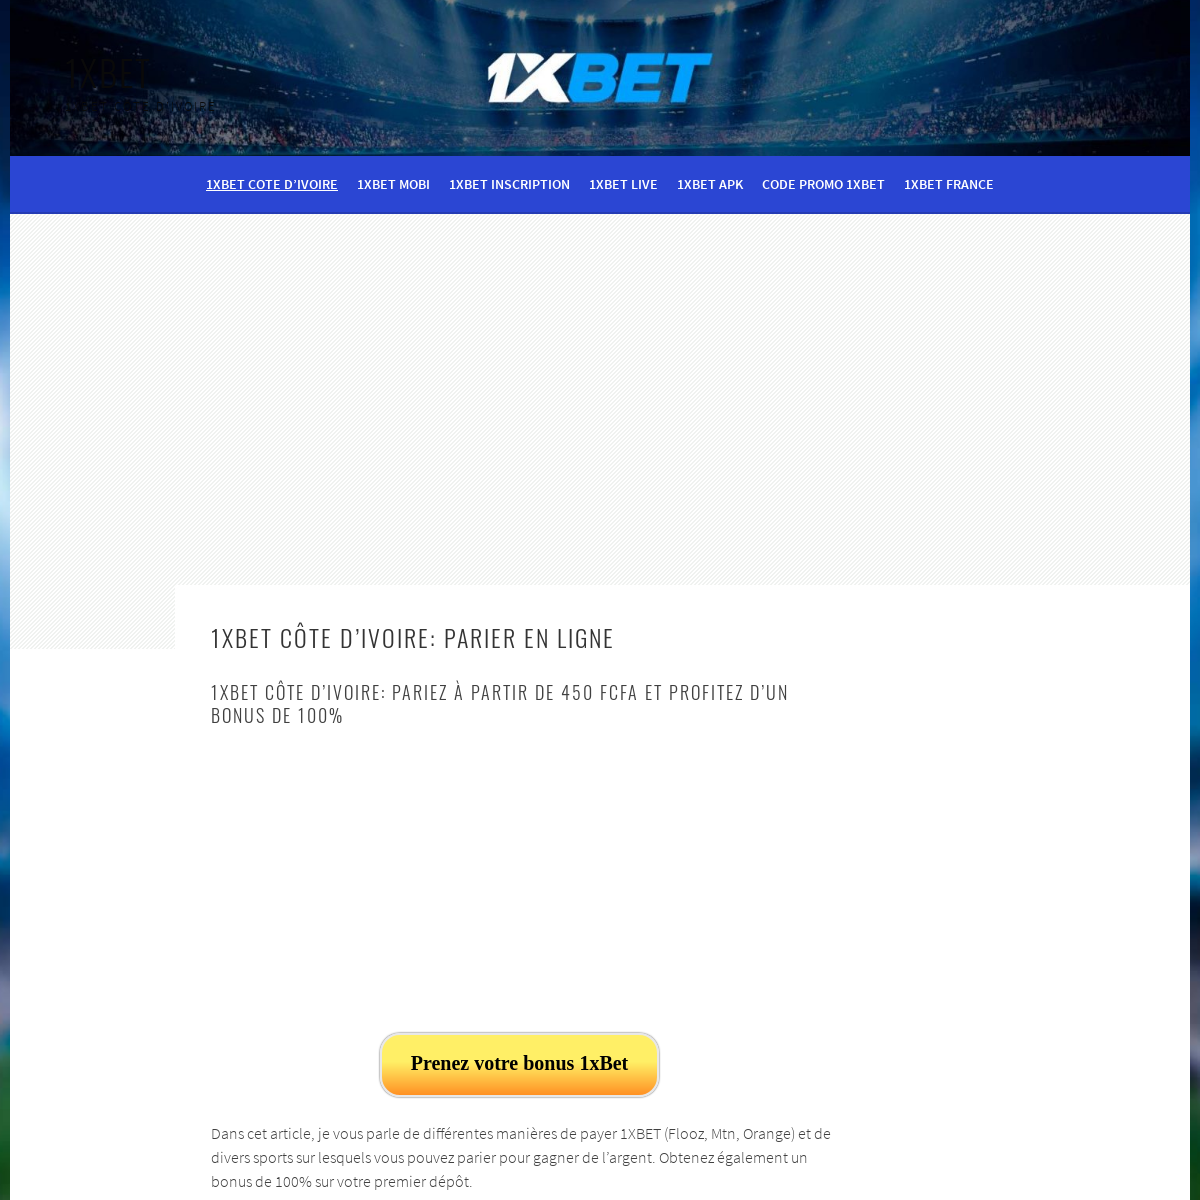 A complete backup of 1xbet-ci.xyz